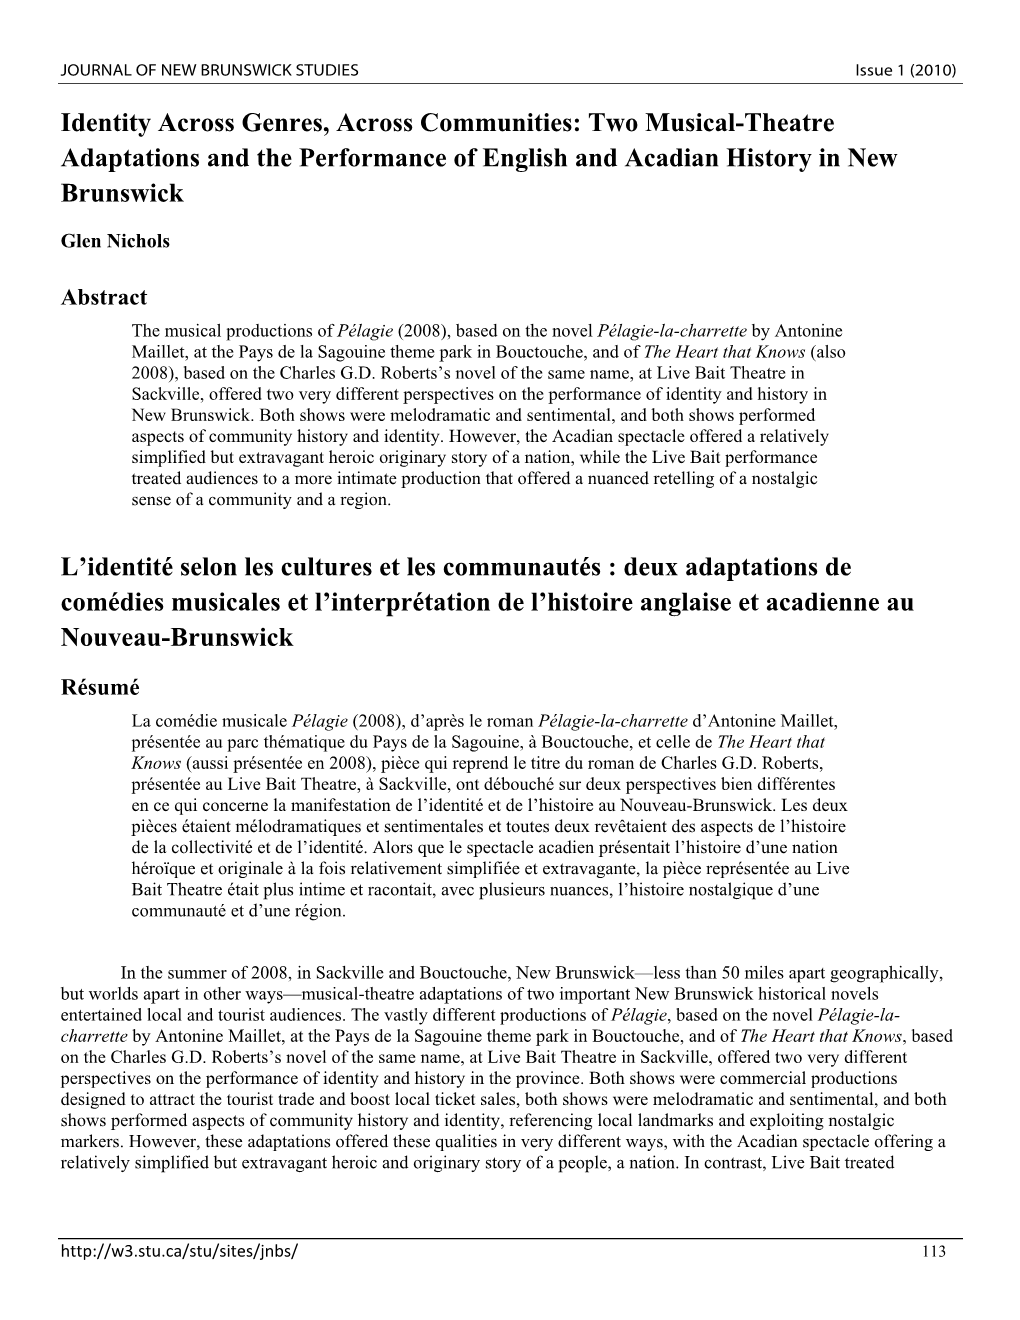 Two Musical-Theatre Adaptations and the Performance of English and Acadian History in New Brunswick